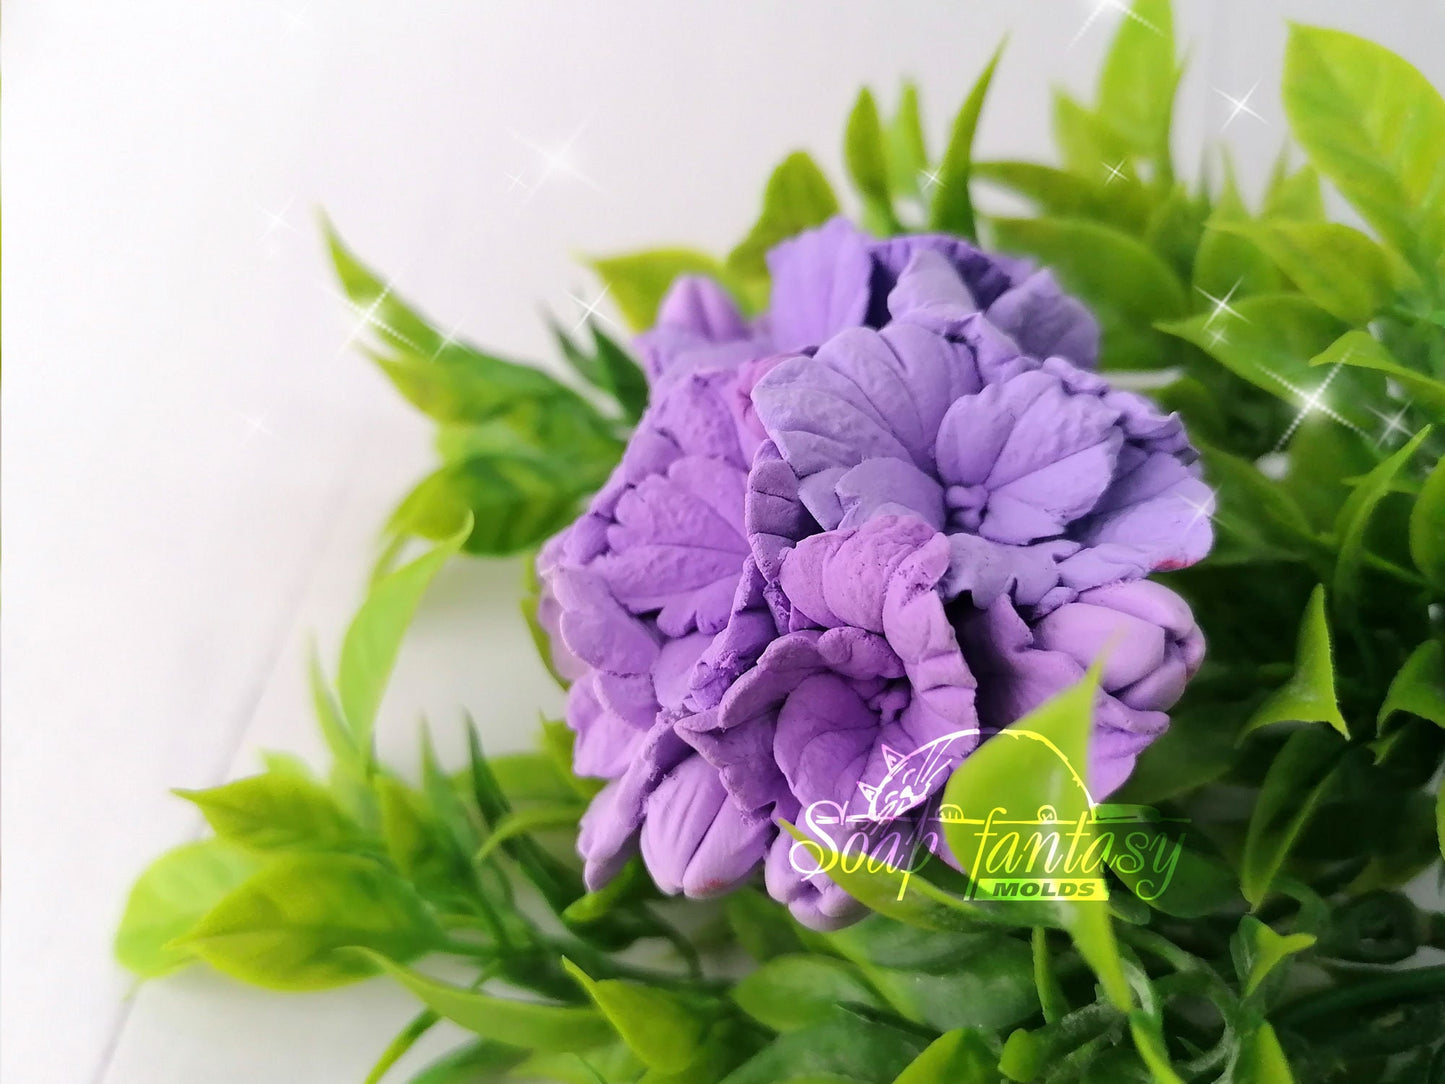 Hydrangea flower silicone mold for soap making